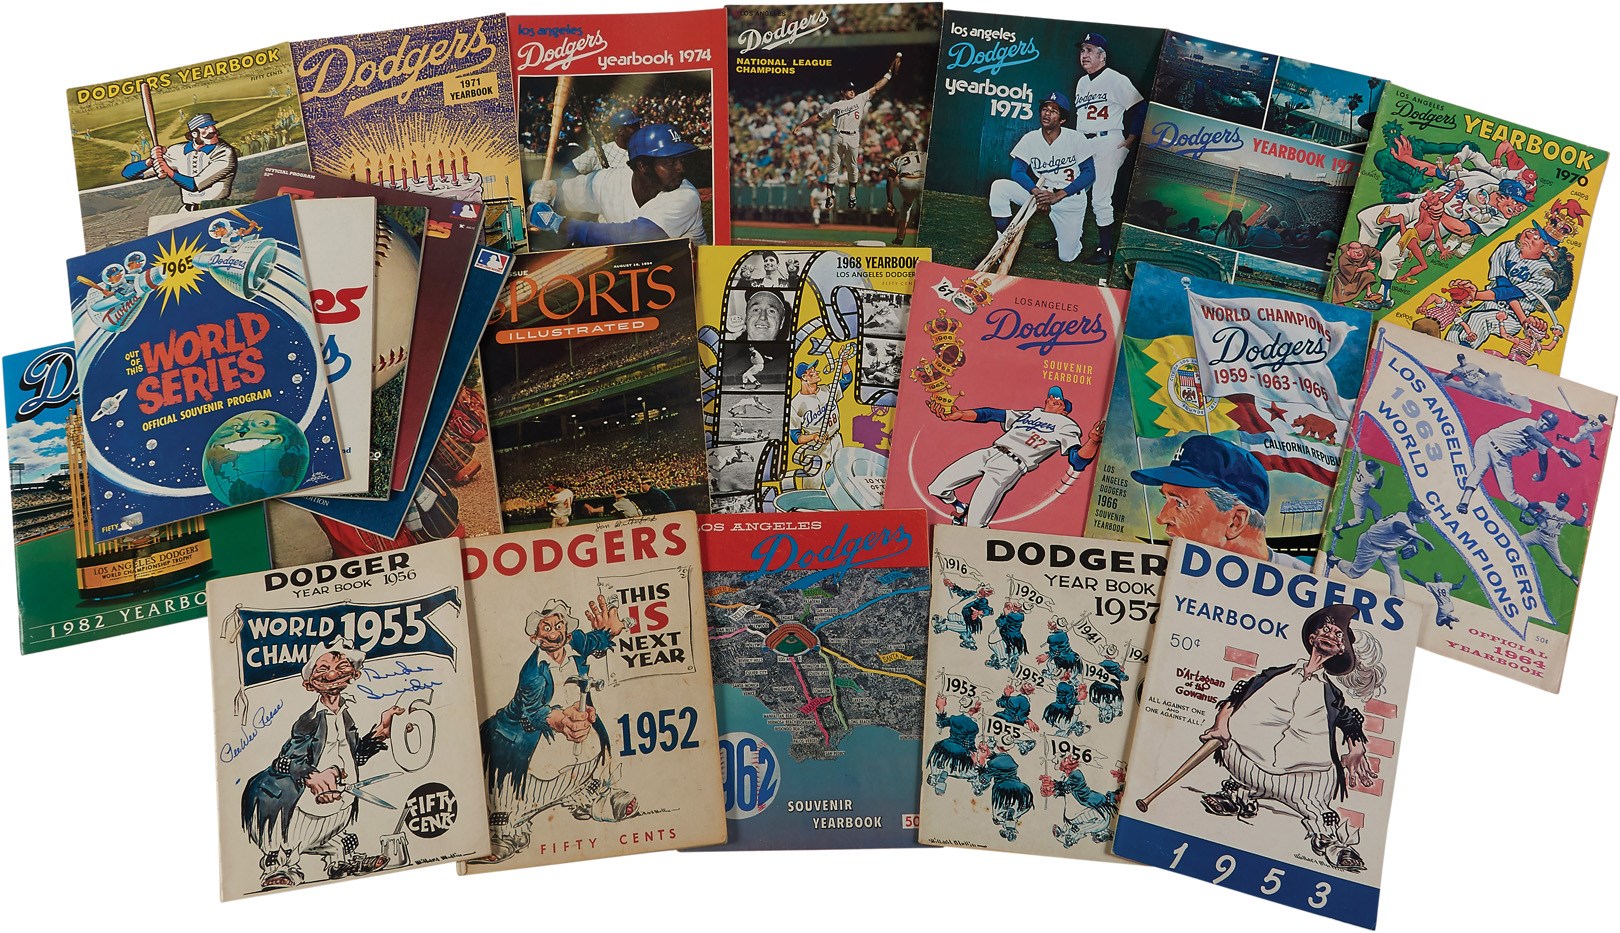 Jackie Robinson & Brooklyn Dodgers - From Matty to Brooklyn Books and Publications (40+)